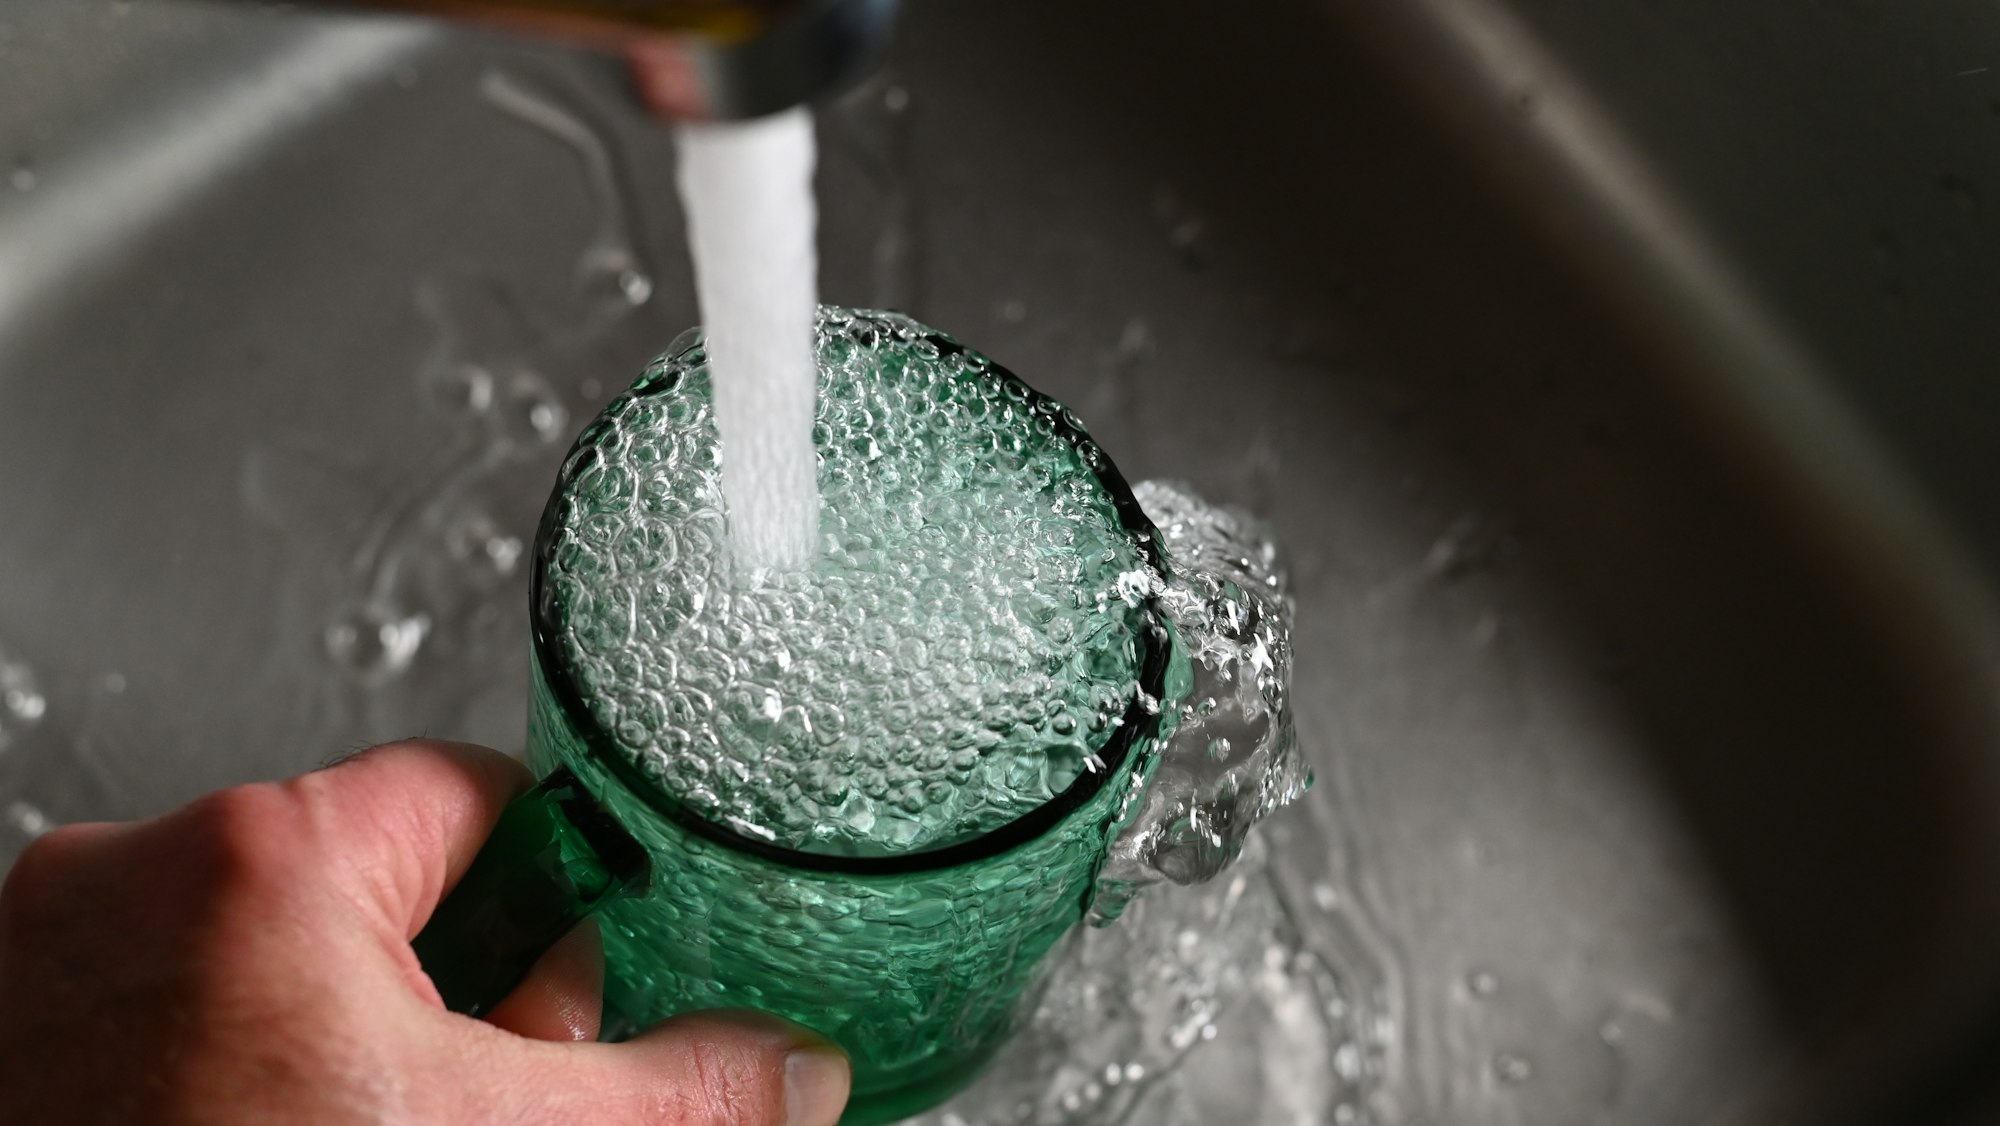 Tap water flows into the cup